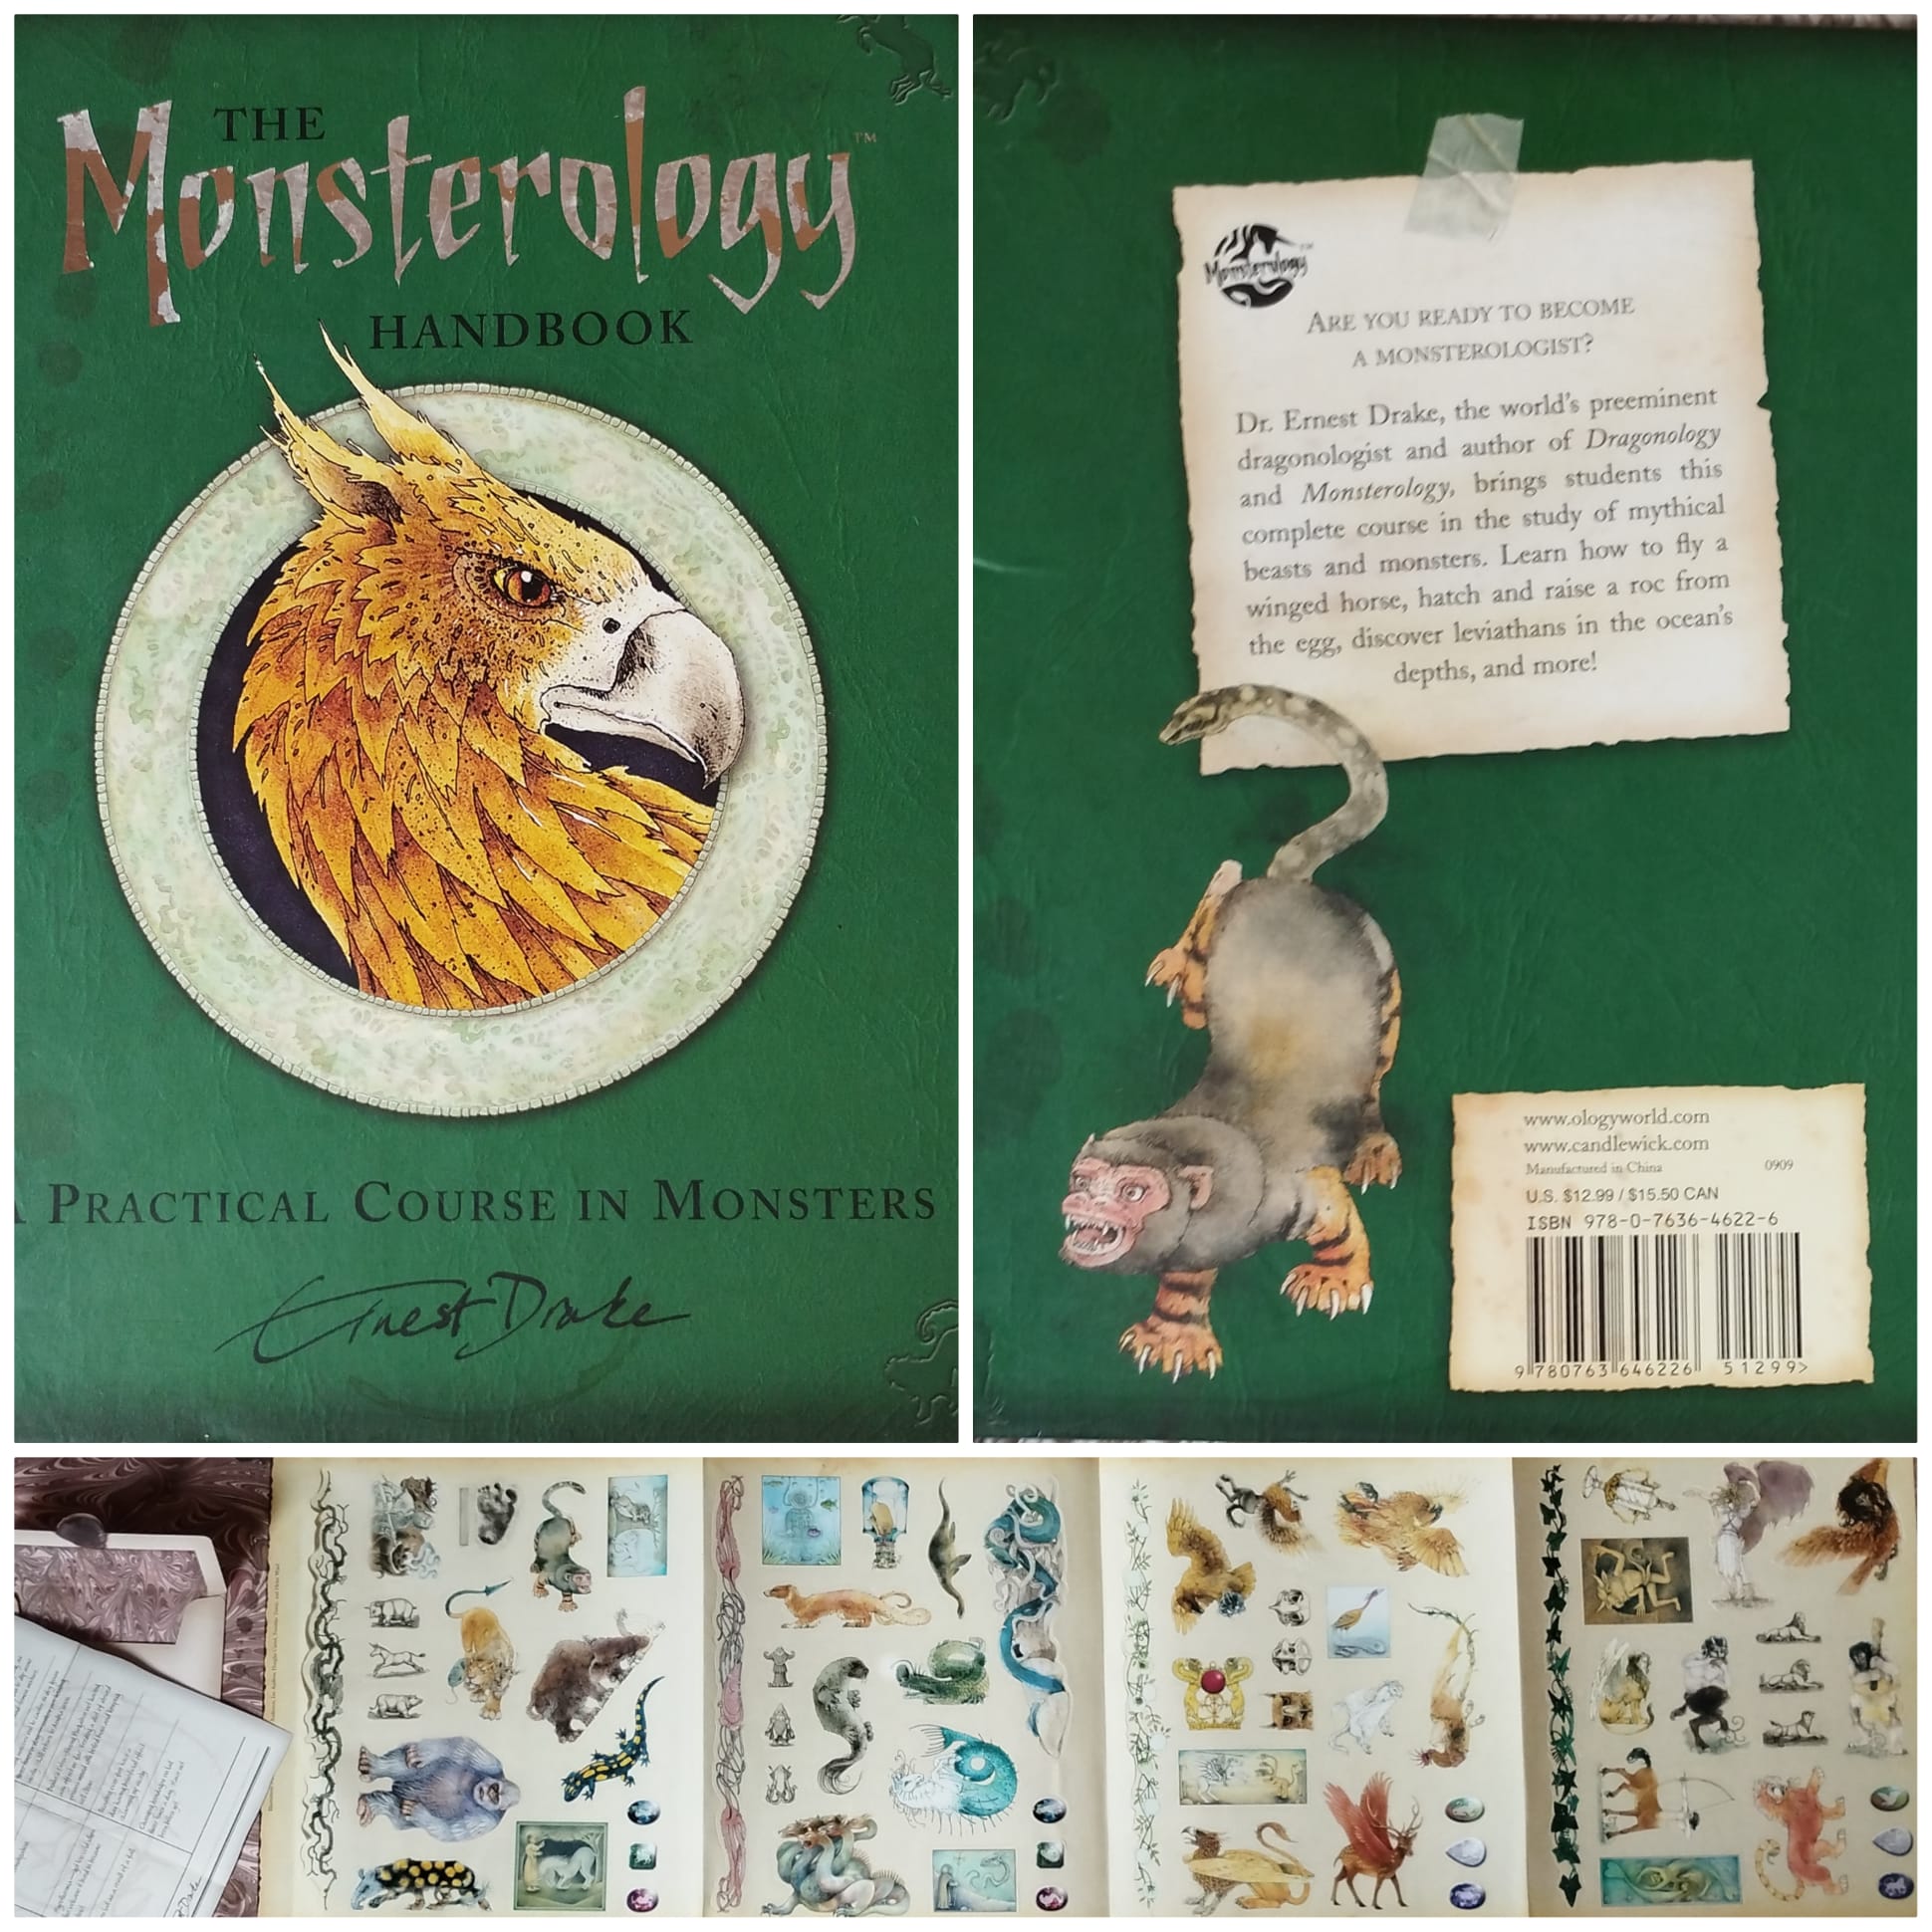 Monsterology The Monsterology Handbook: A Practical Course in Monsters Candlewick Press